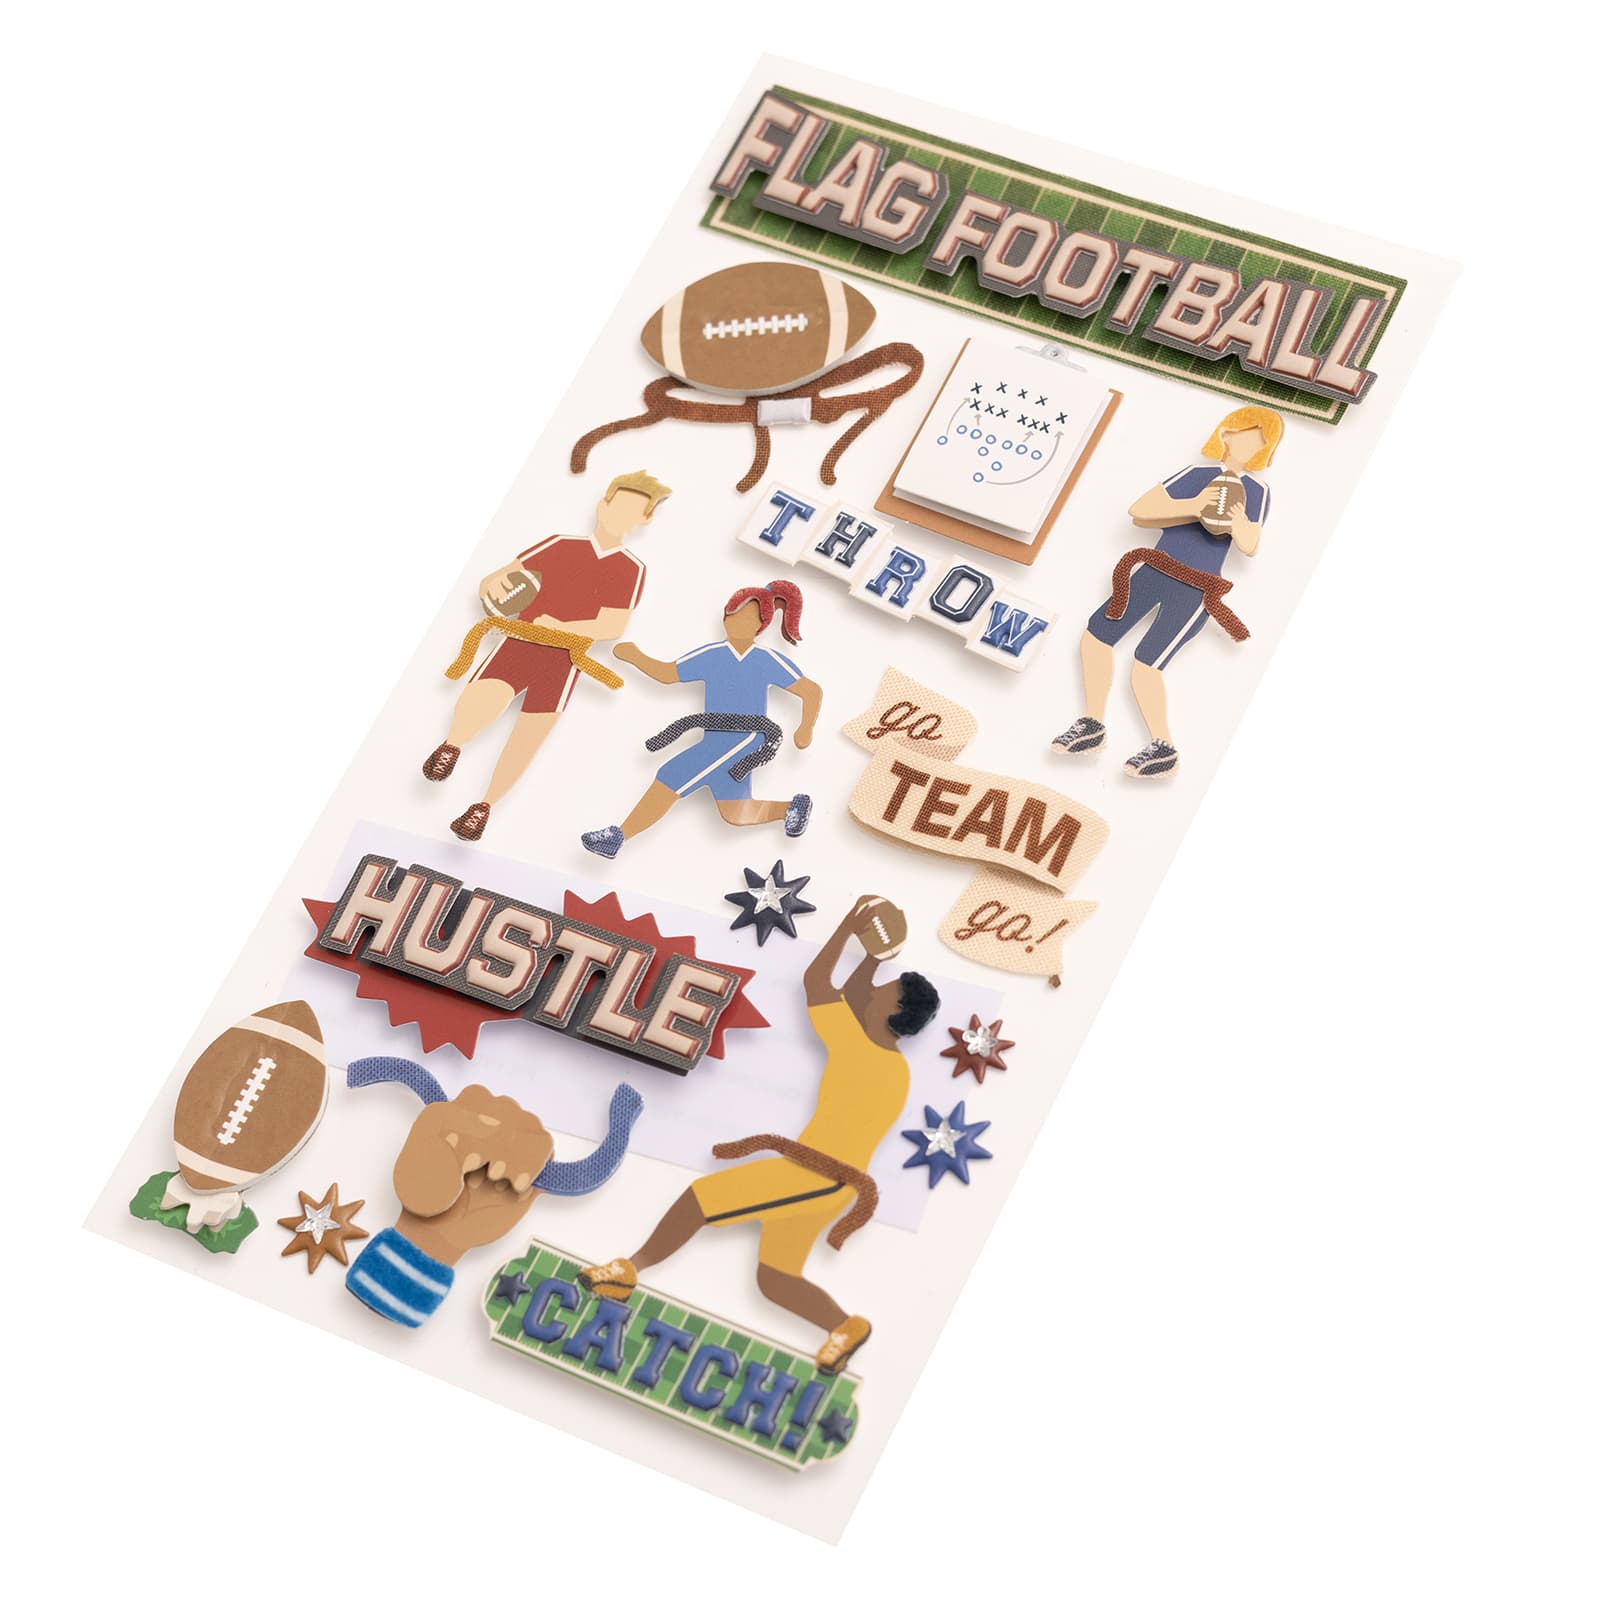 Flag Football Dimensional Stickers by Recollections&#x2122;